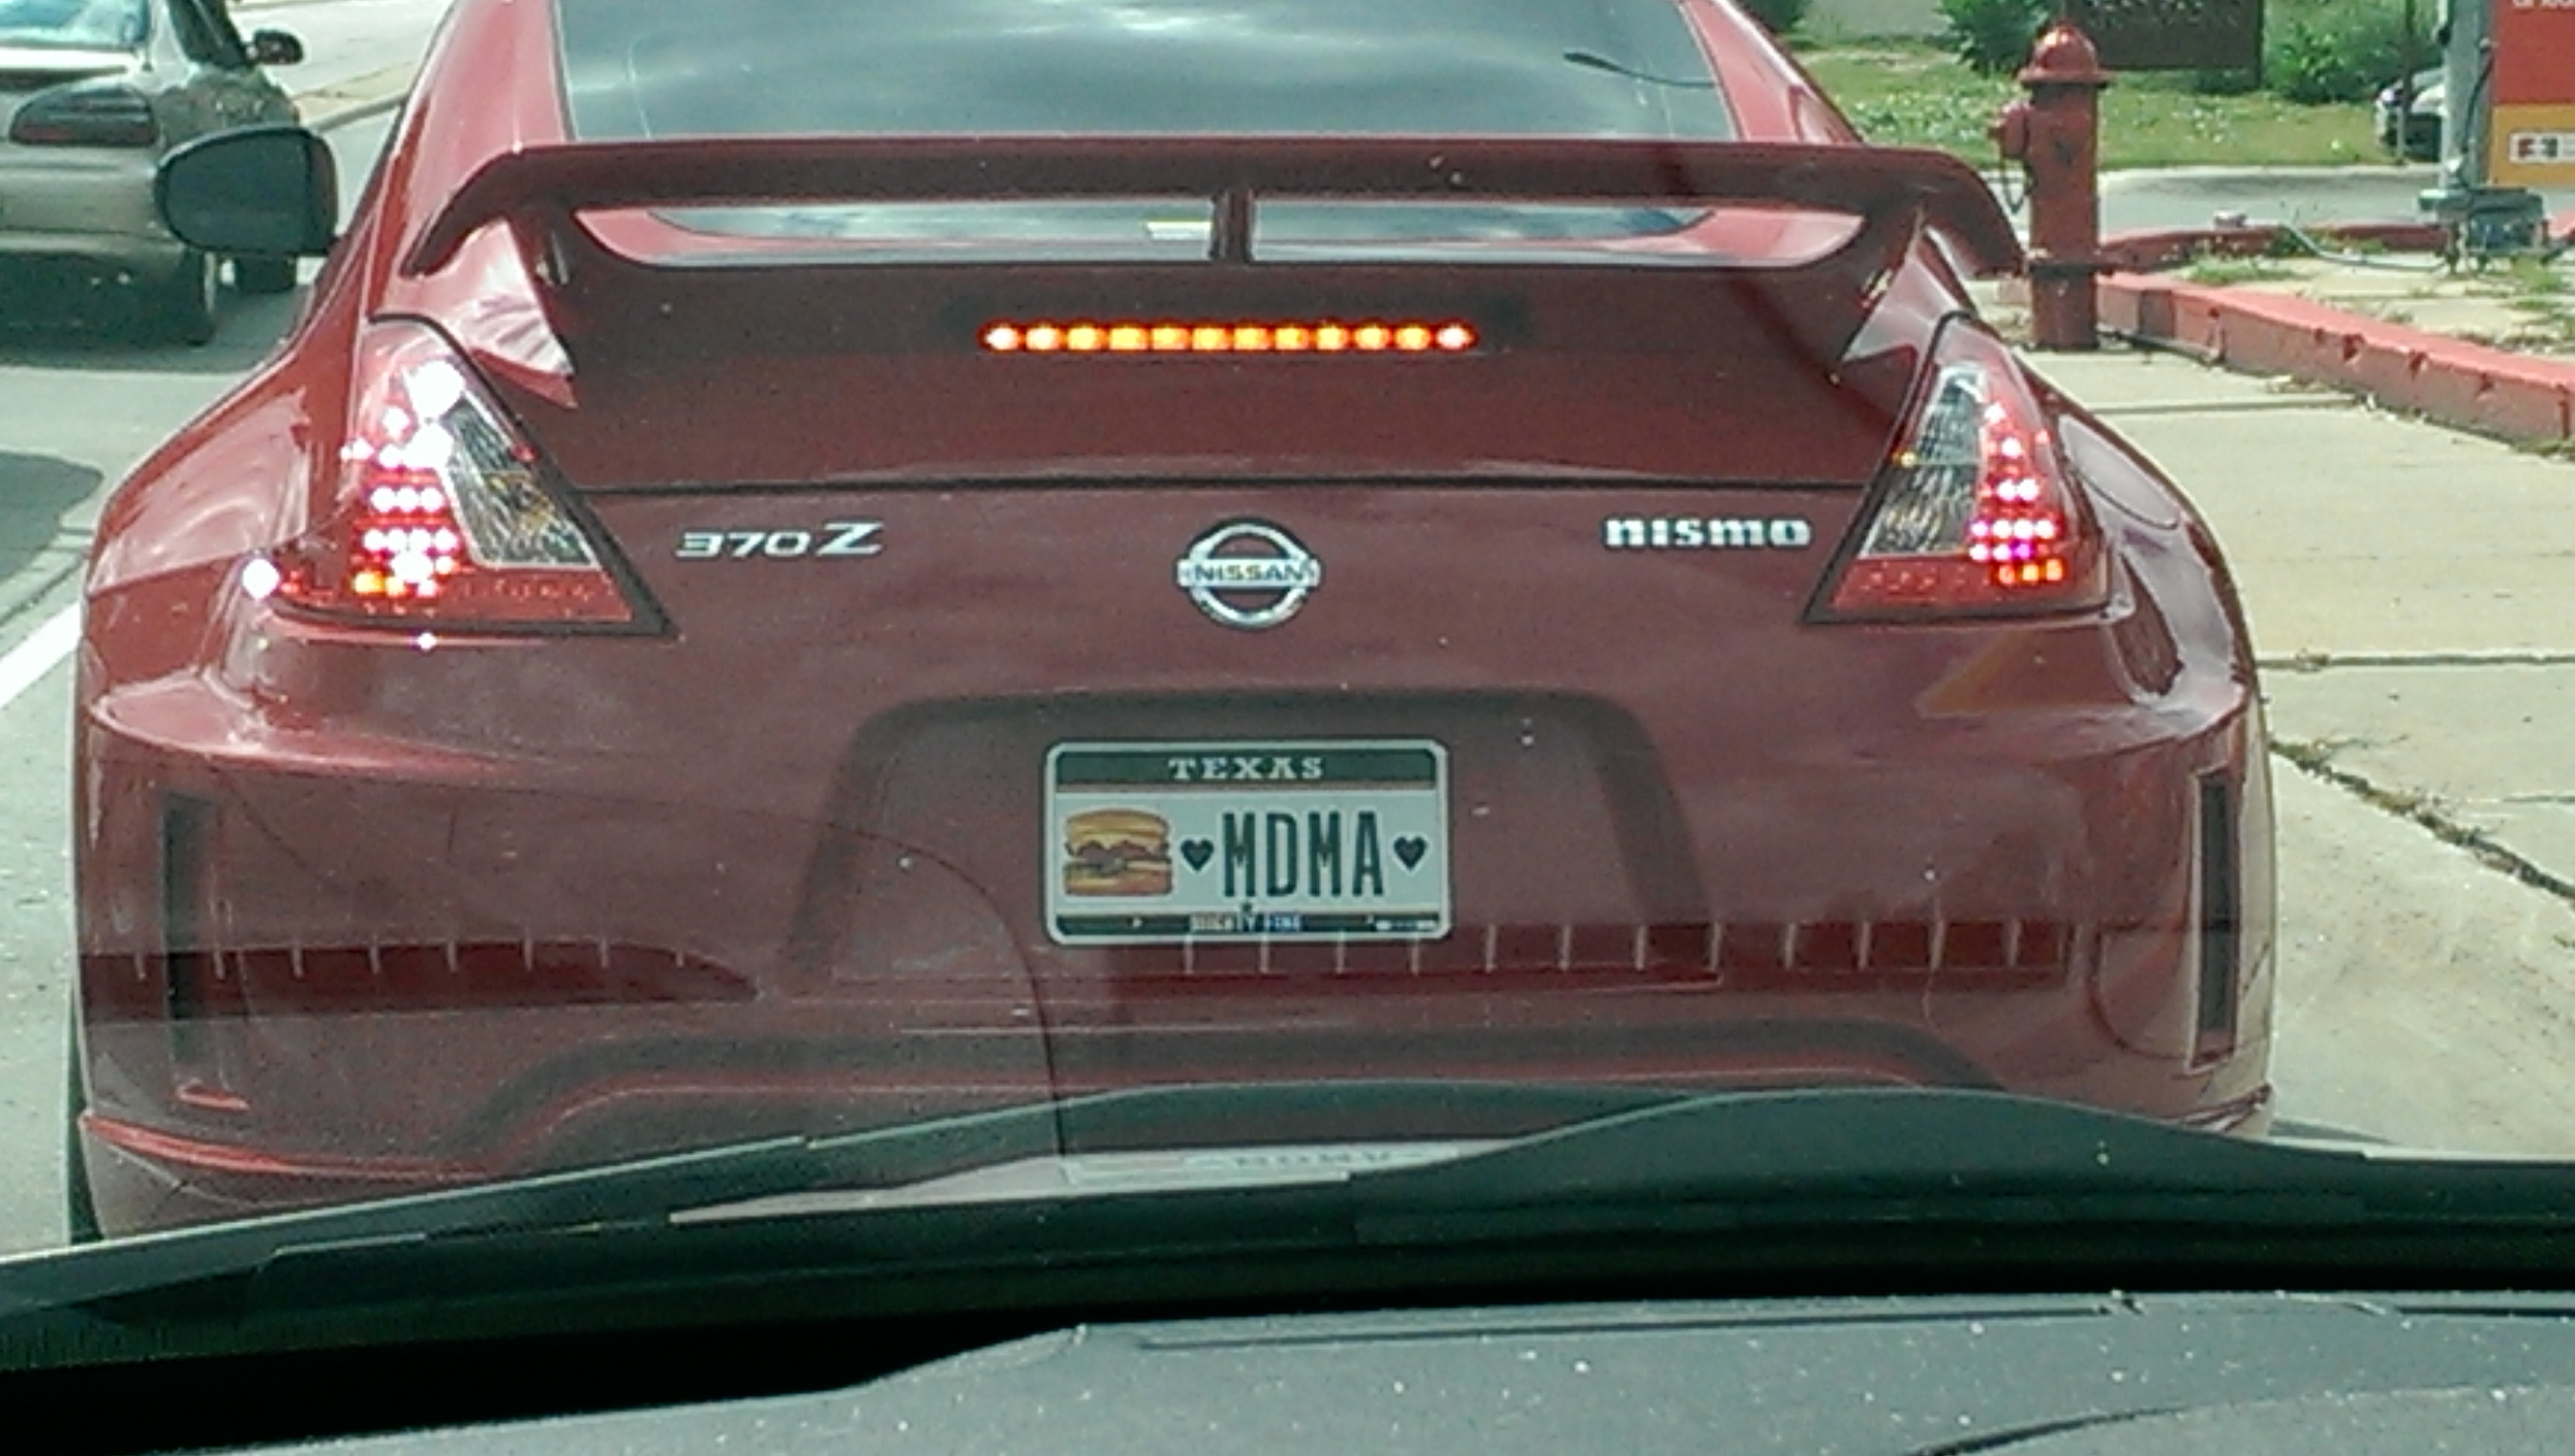 car license plate from texas spotted in nebraska